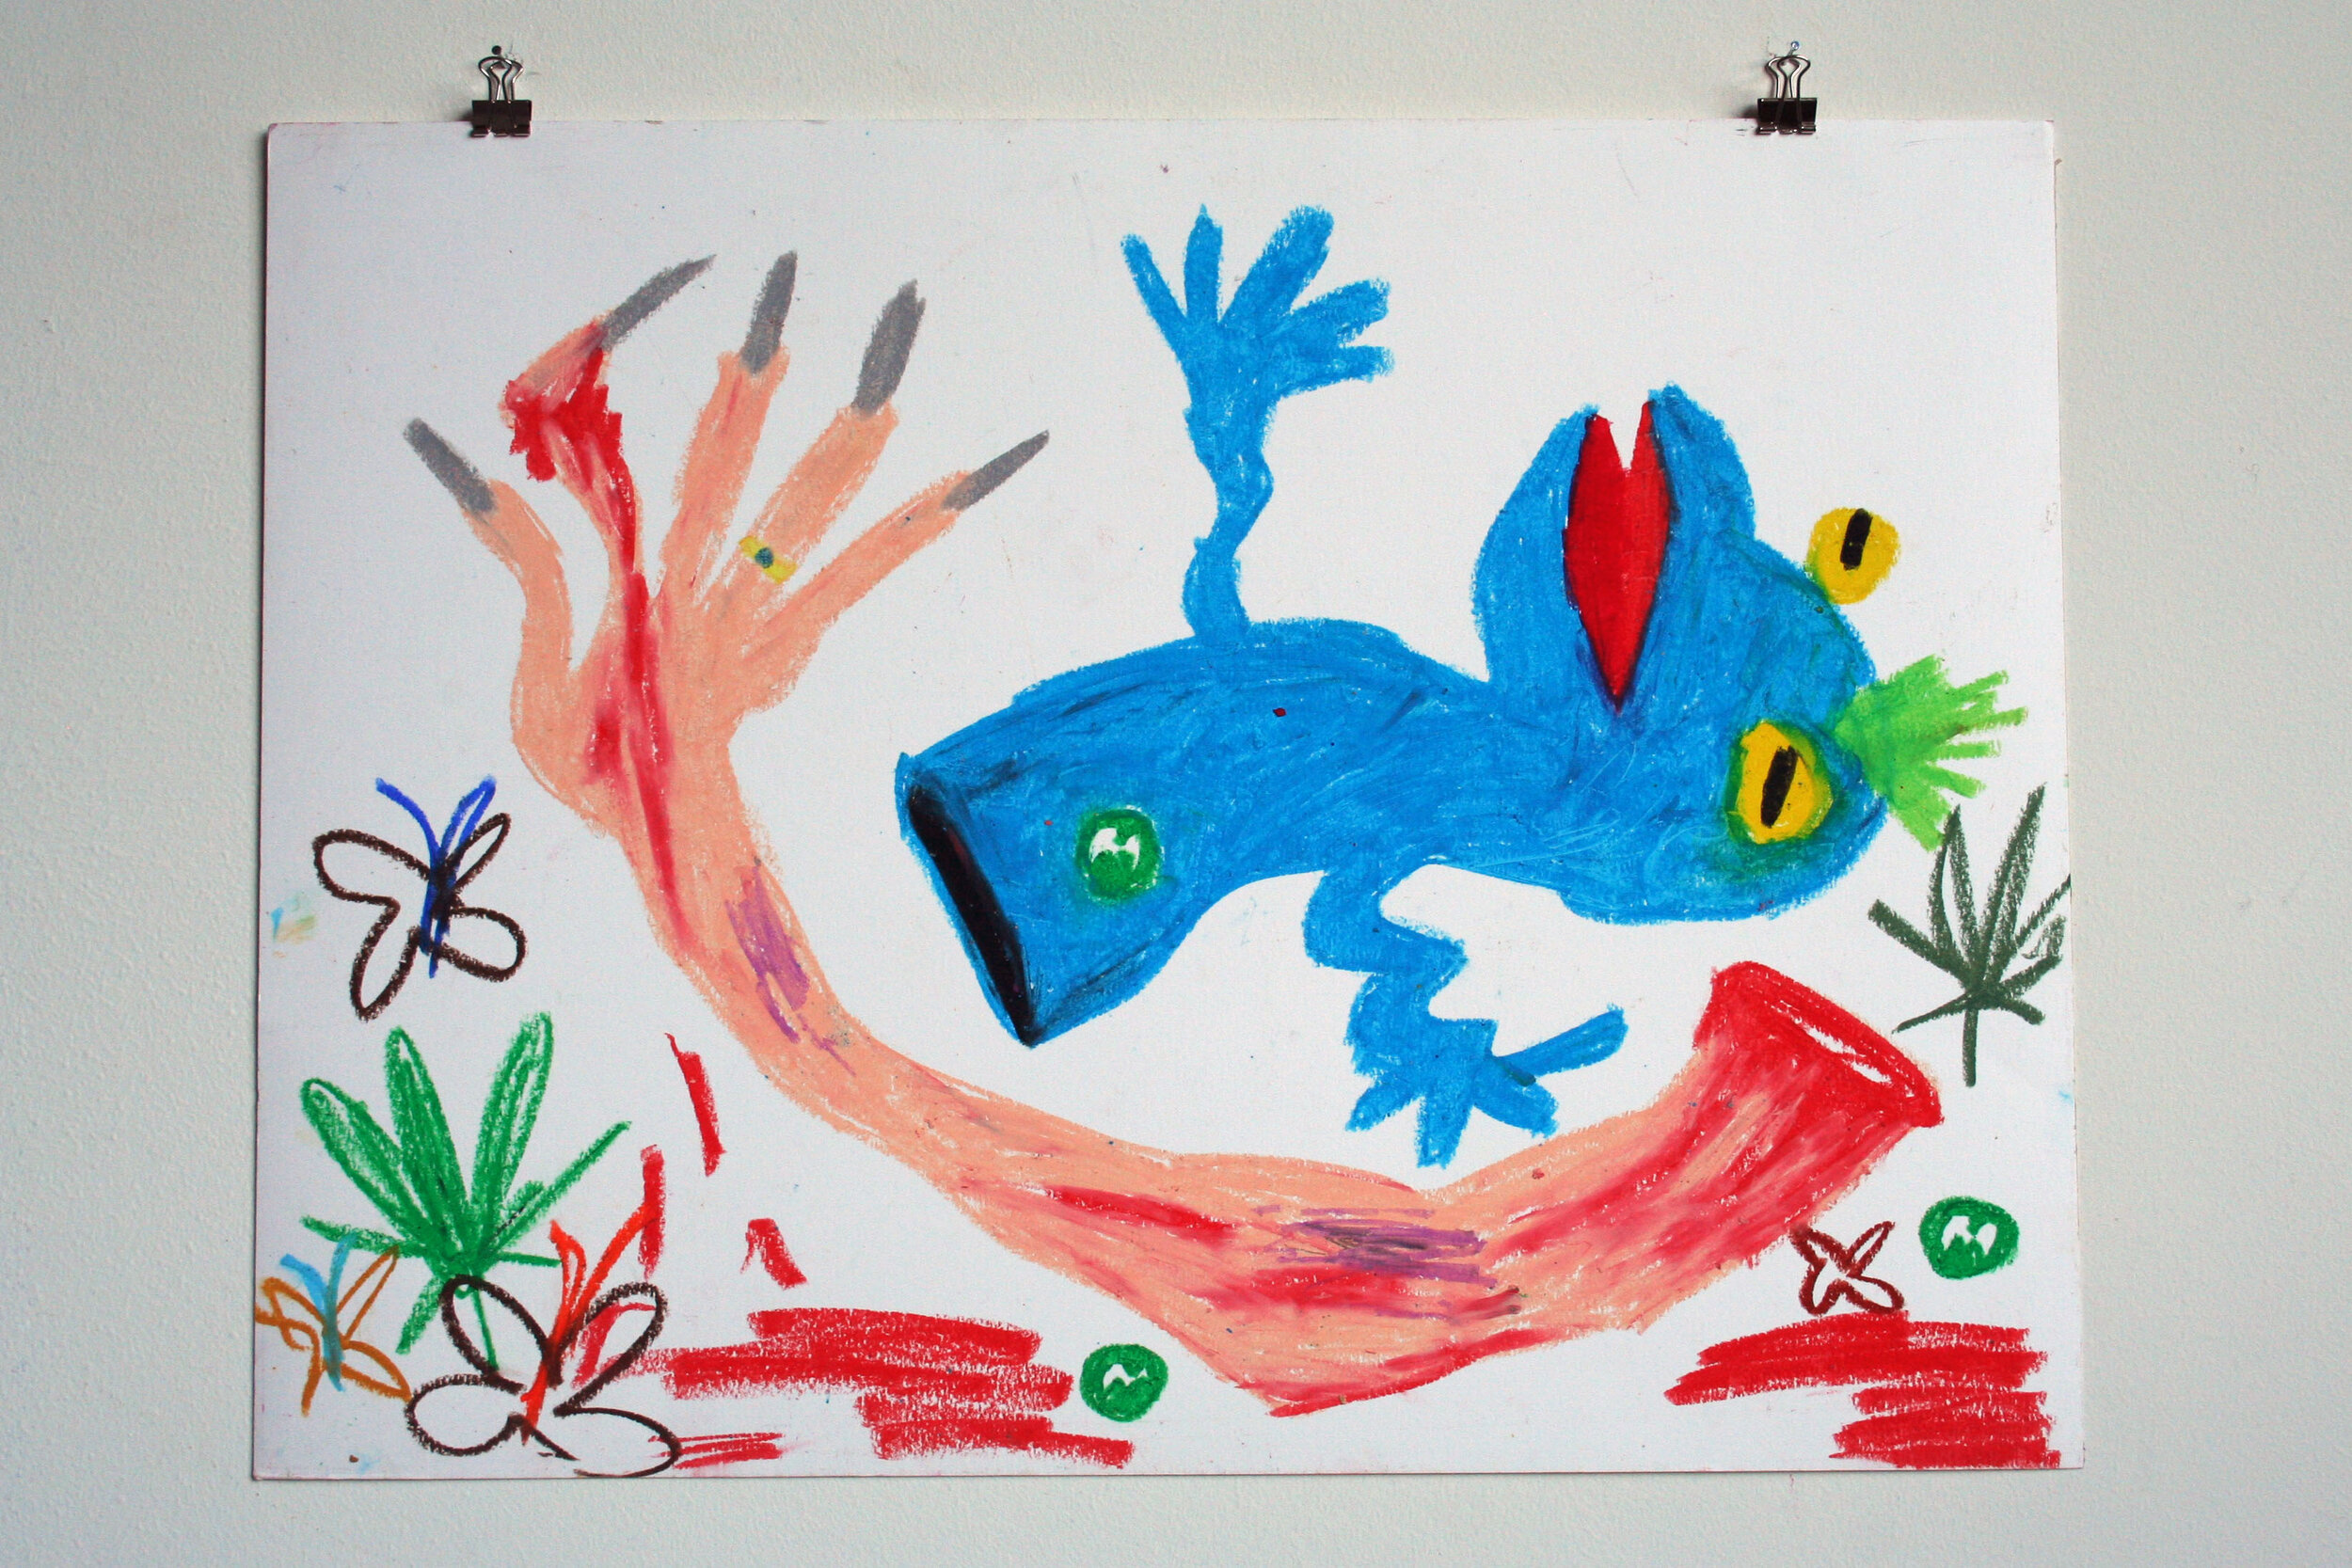   The Puppeteer,  2014  18 x 24 inches (45.72 x 60.96 cm.)  Oil pastel on paper 